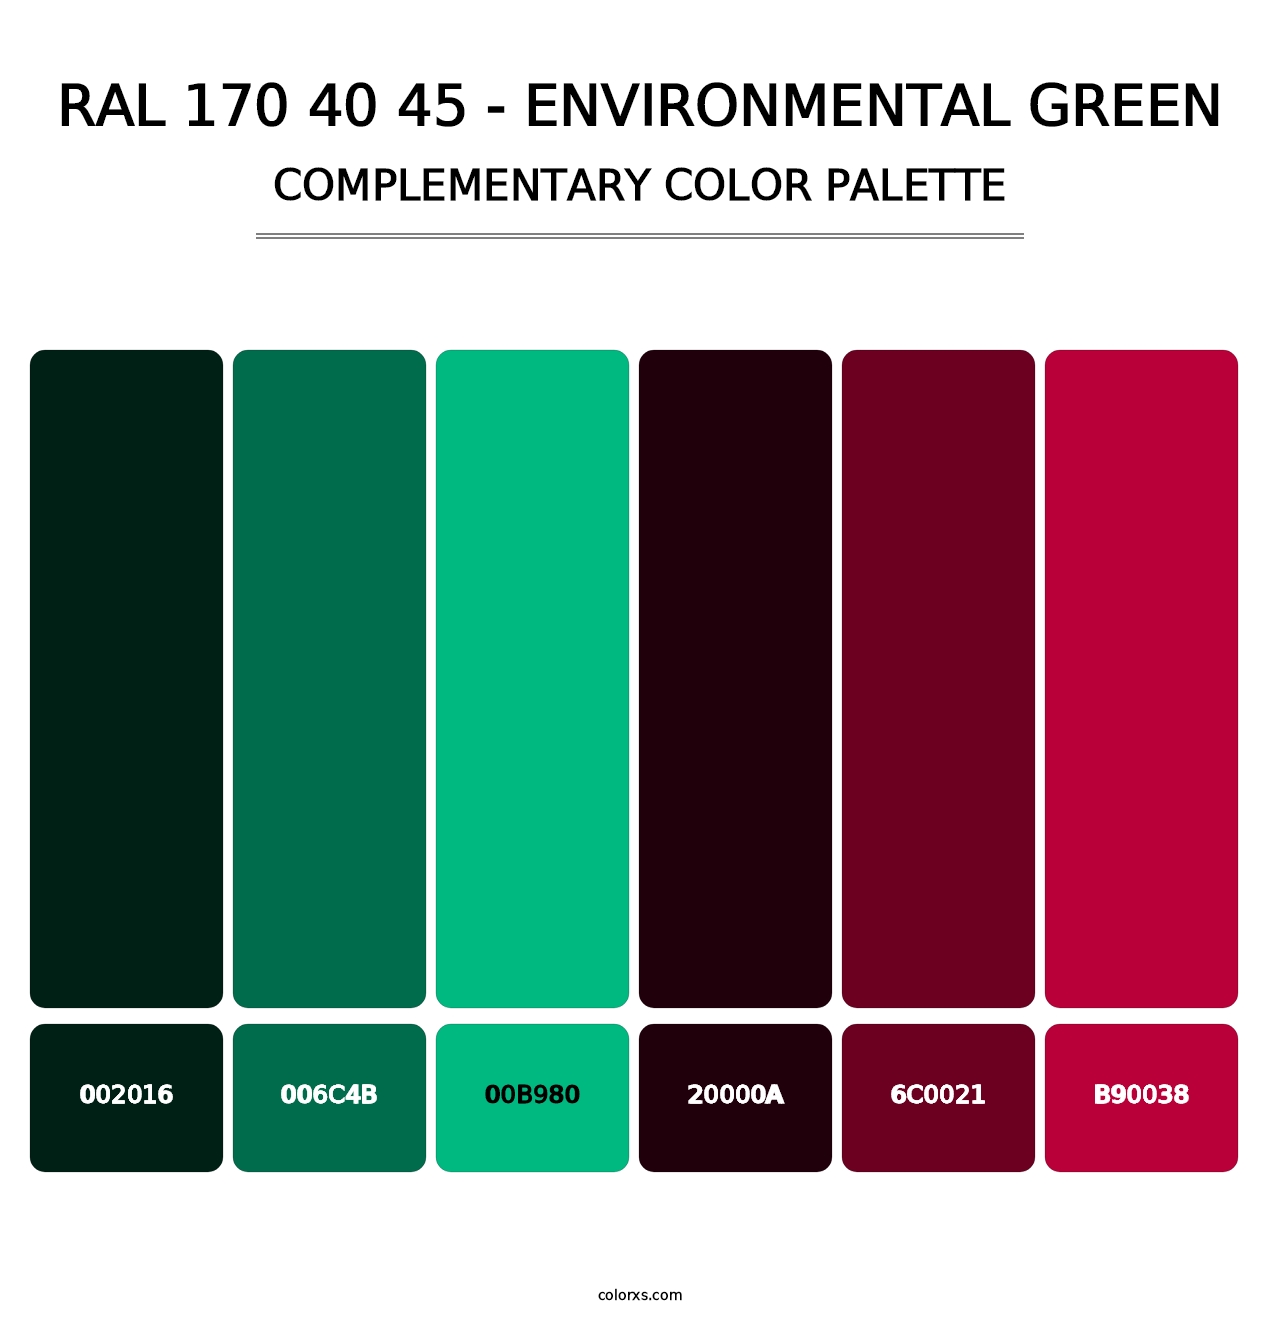 RAL 170 40 45 - Environmental Green - Complementary Color Palette